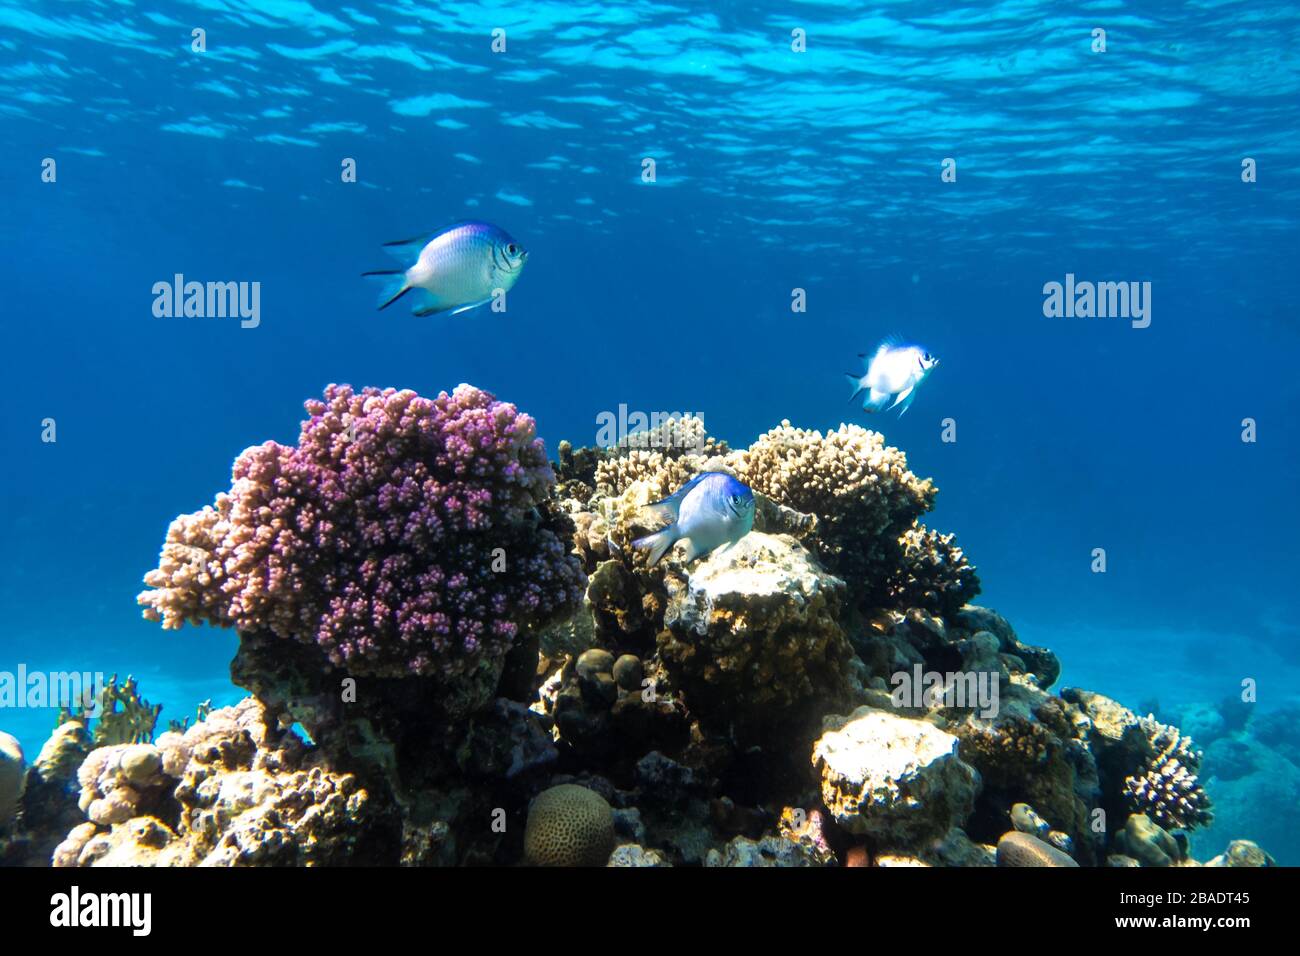 Tropical Fish In The Ocean. Beautiful Silver Moonfish (Moony, Monodactylidae) In The Red Sea Near Coral Reef. Purple Hard Corals, Underwater Diversity Stock Photo